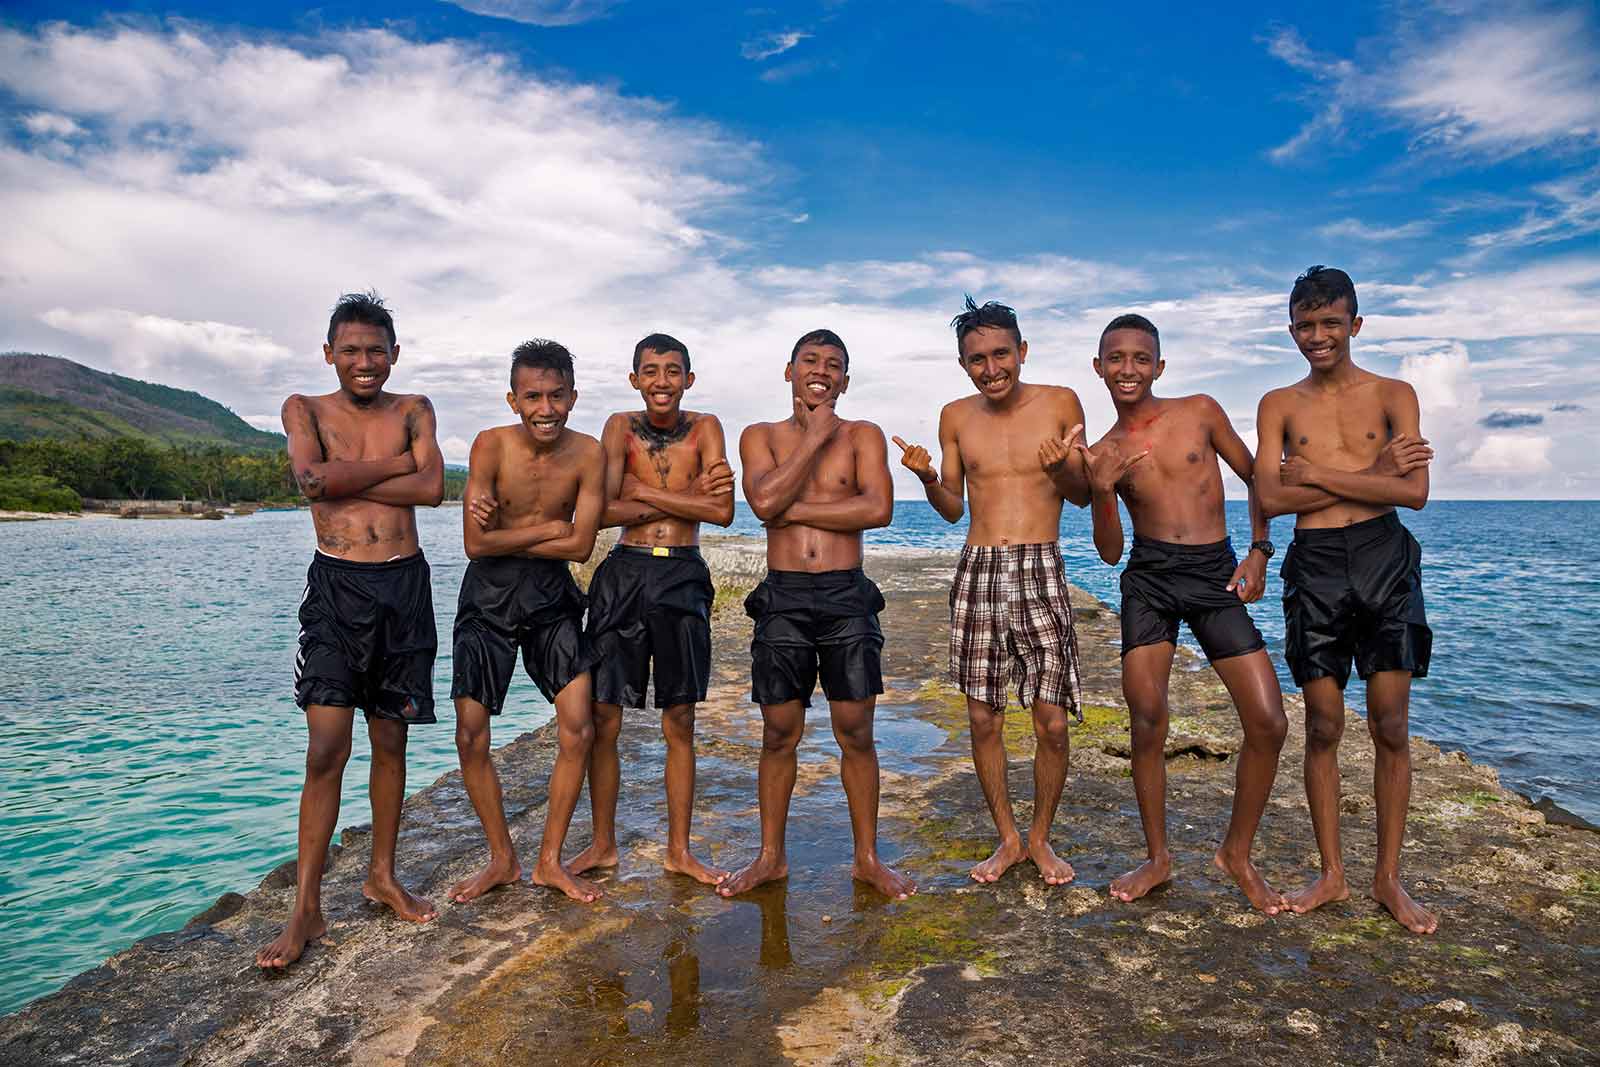 Maluku Islands: Tourists are a rare sight in Ambon, especially with the kind of camera gear we use, so these boys immediately started posing for us.